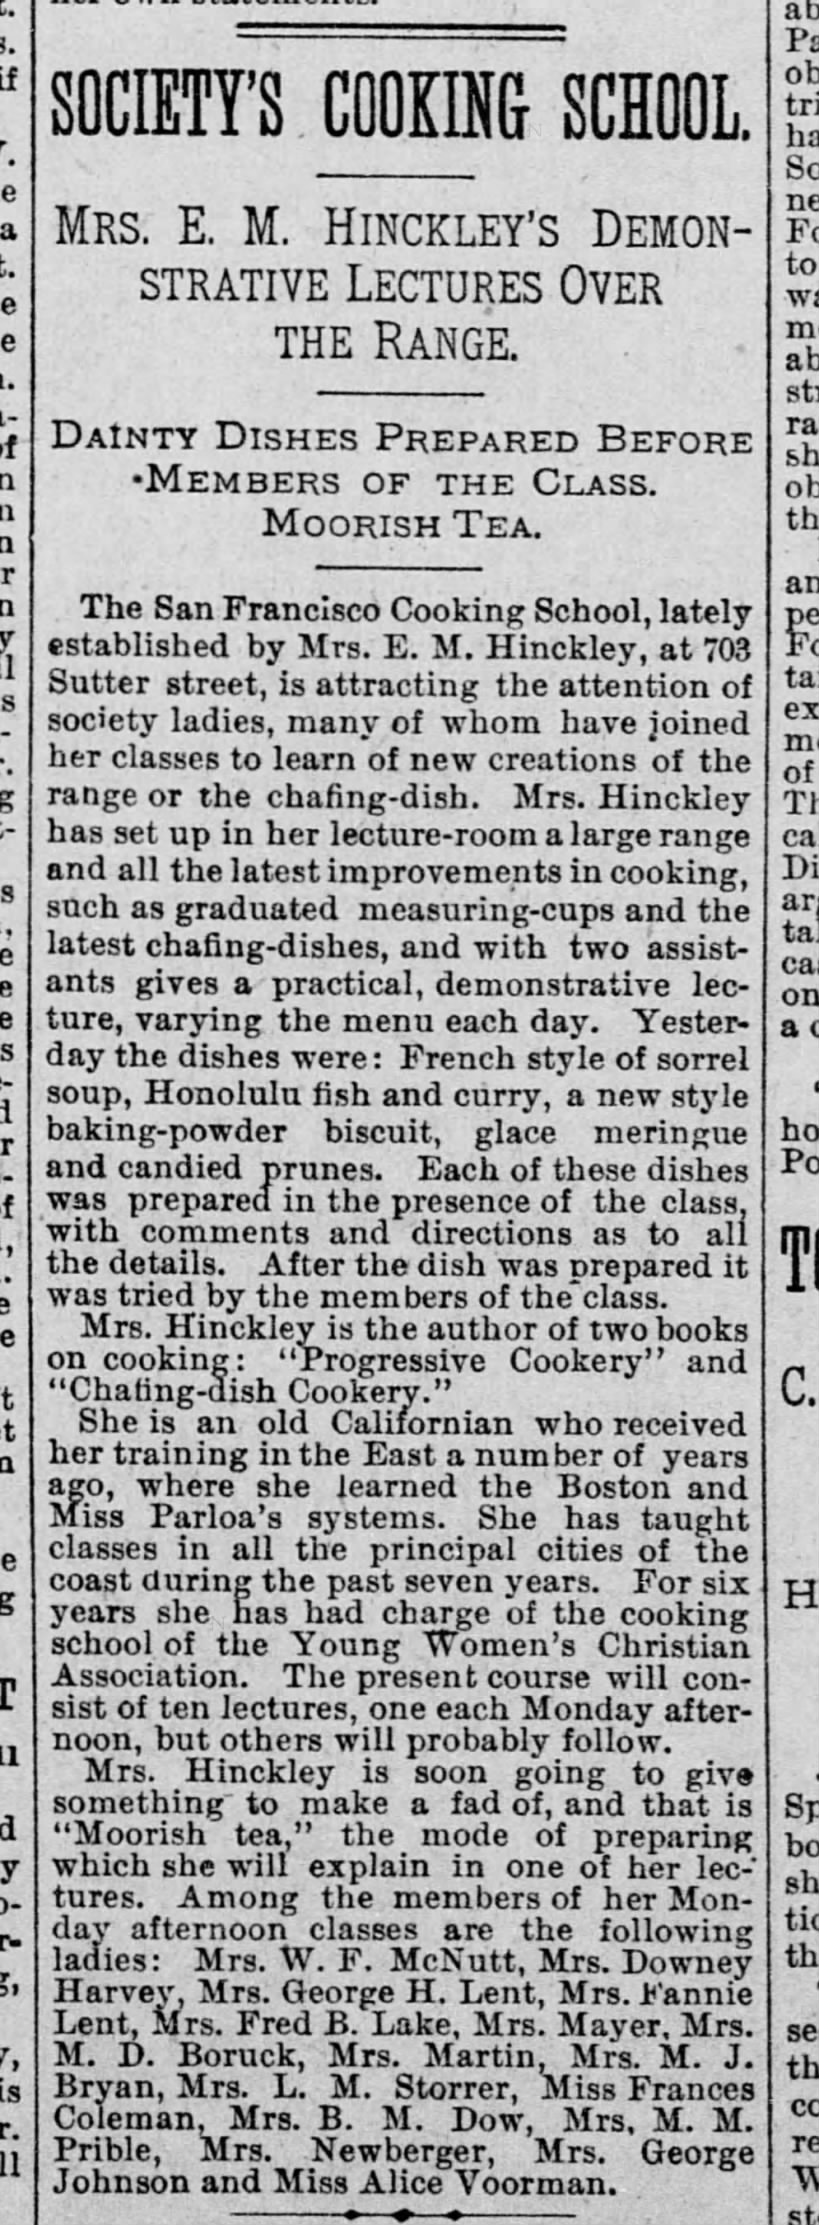 :Society's Cooking School"  Monday afternoon cooking classes SF Call 26 Mar 1895